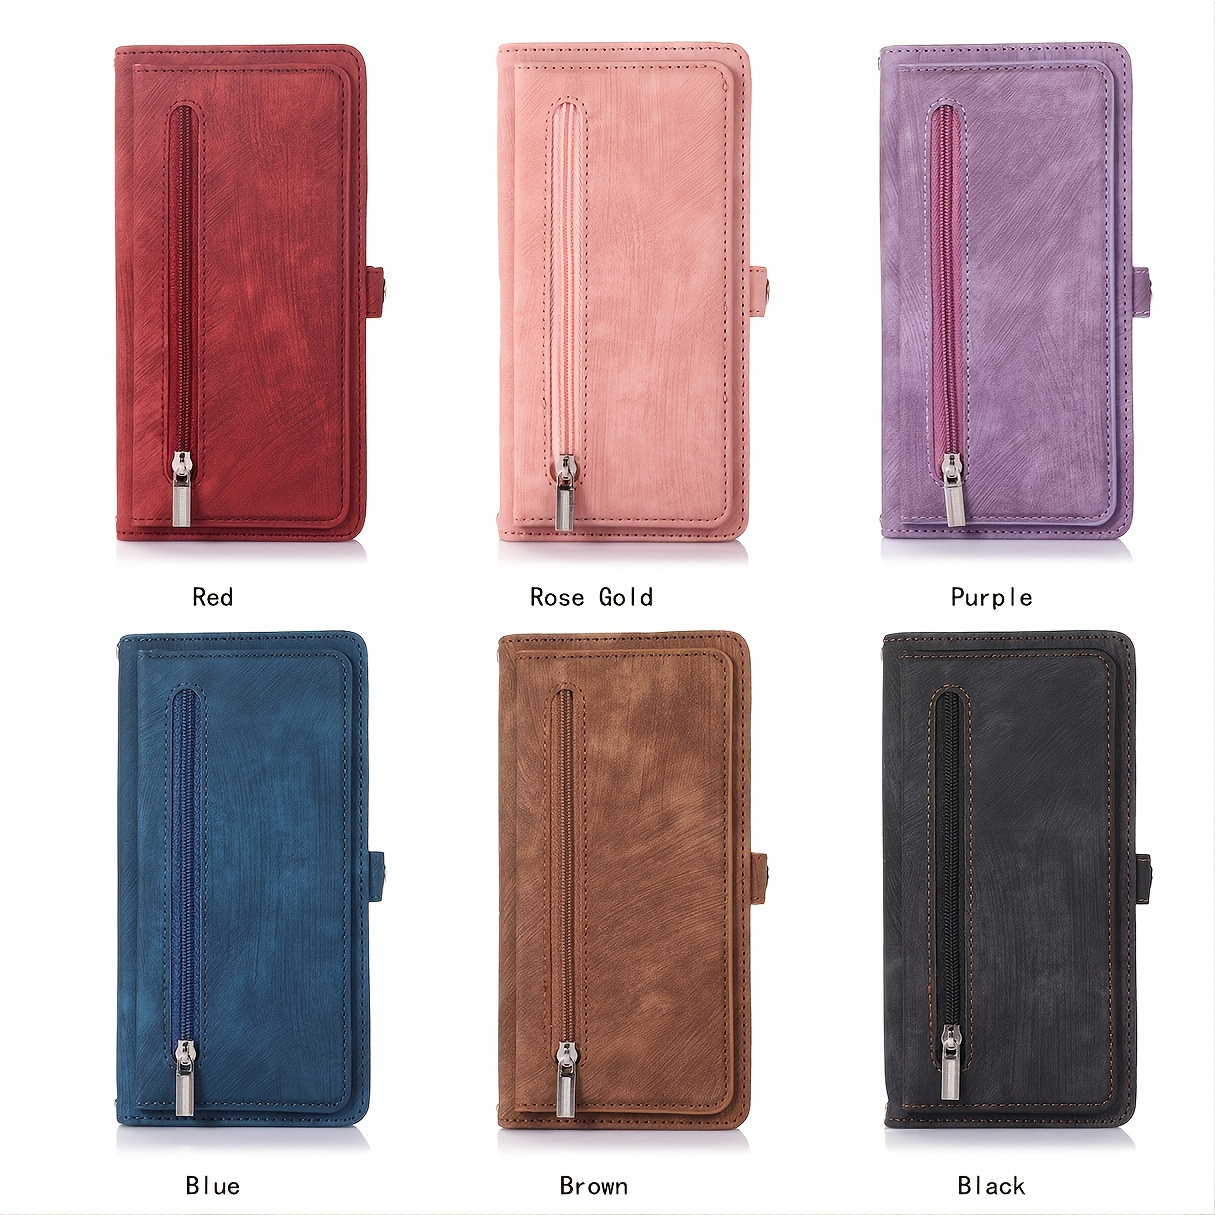 Phone Case With Multifunctional Drop Proof 9 Card Zipper Wallet For Galaxy A52/a52s5g, A32 5g, S22 Ultra, A51, A22 5g, S21, S20 Fe, A72, A21s